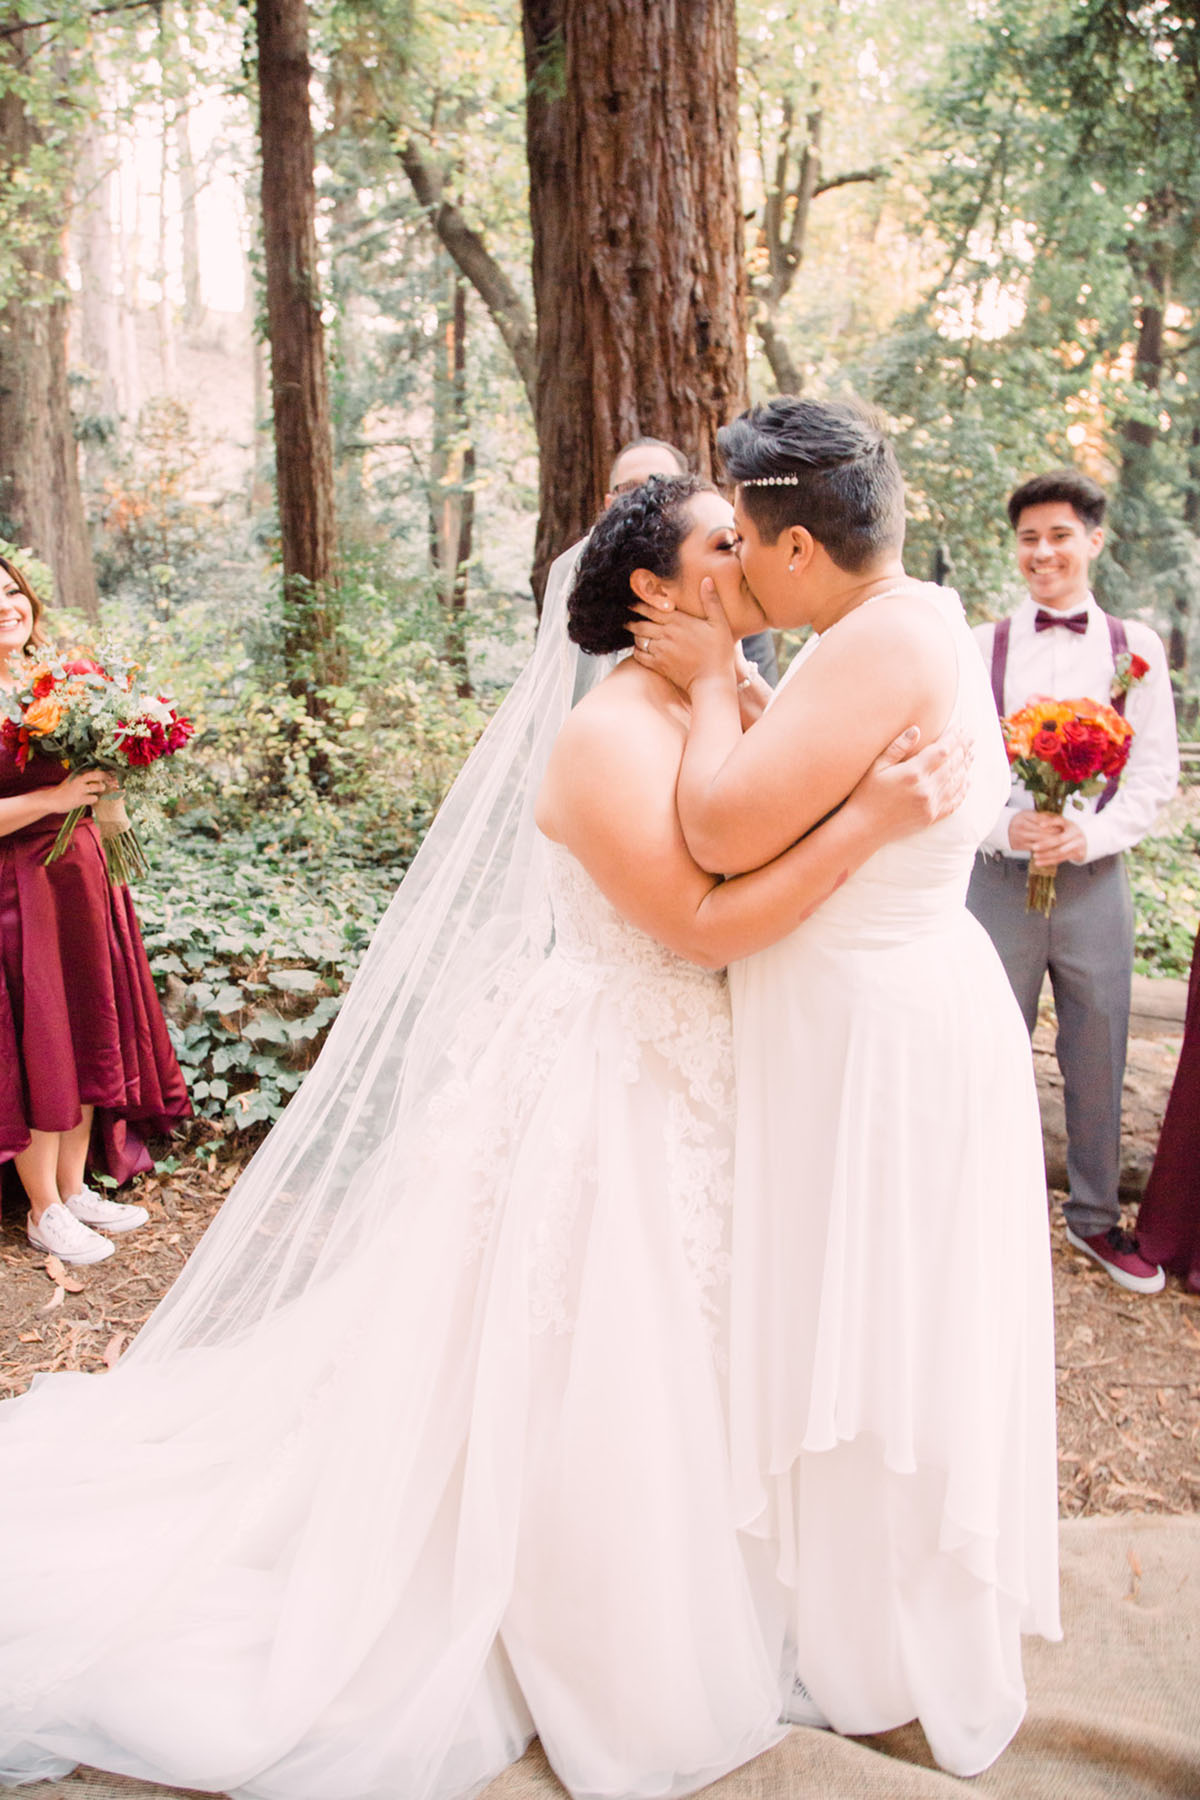 This couple got married in San Francisco during the California wildfires two brides breast cancer survivor white lace dresses kiss